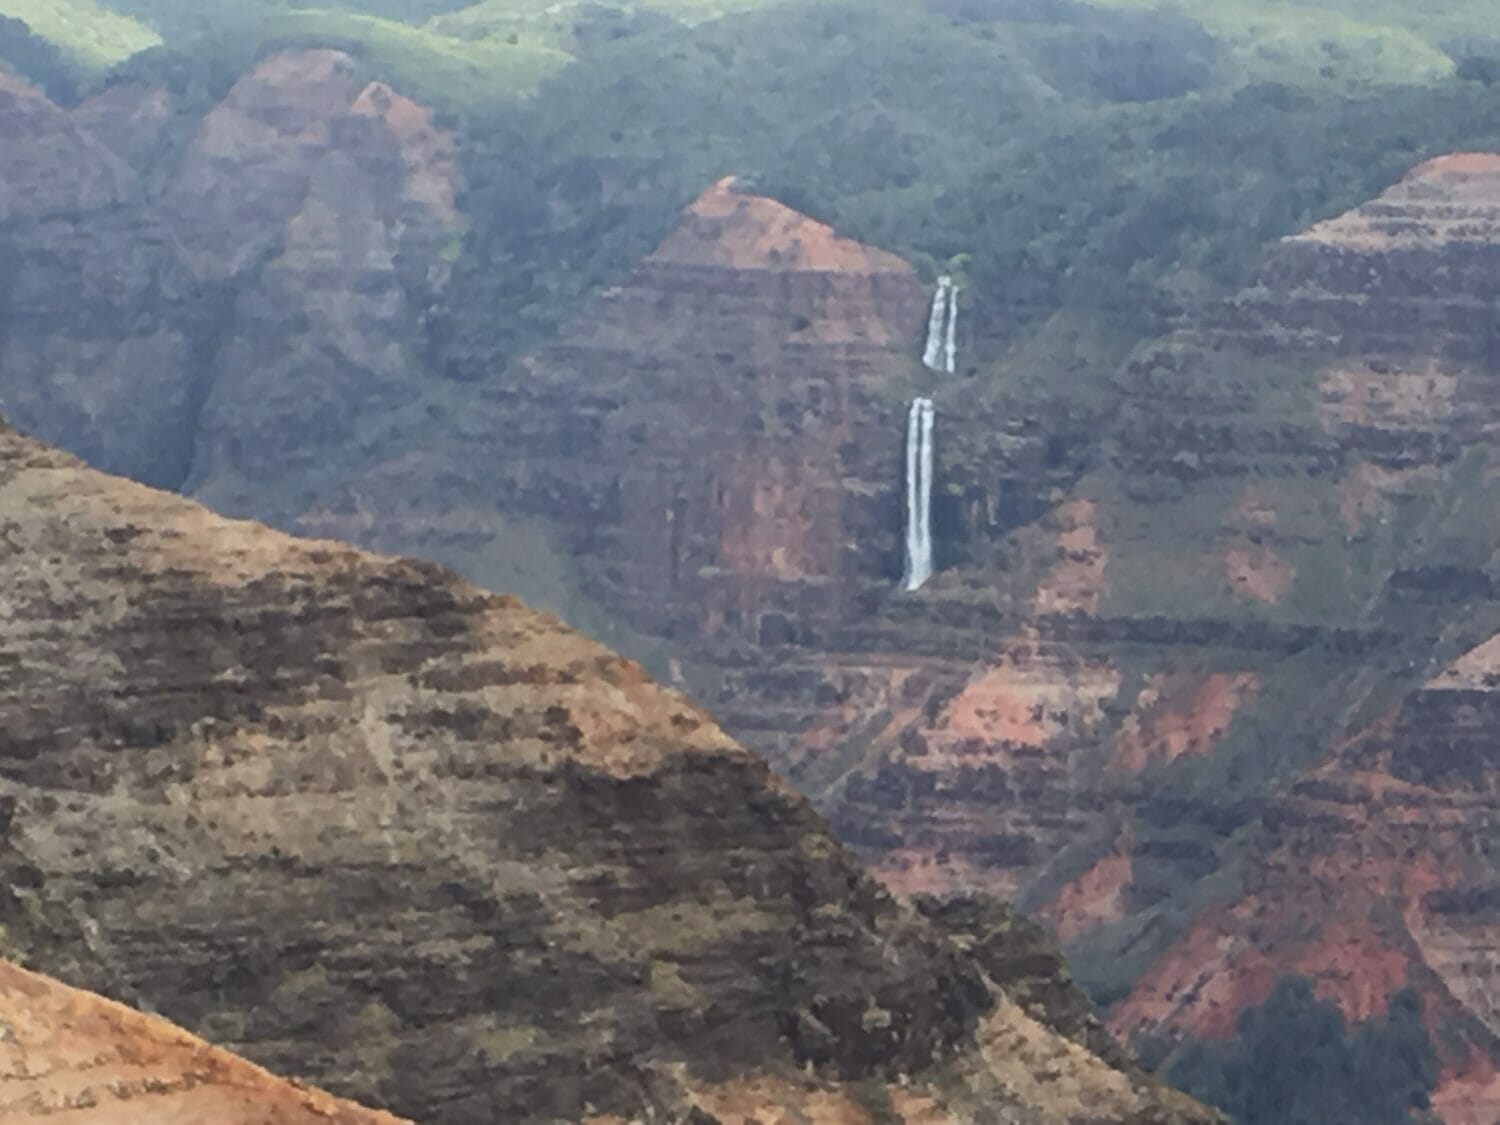 Considering a trip to Kauai with your keiki (kids)? This list of fun things to do on Kauai with kids, based on our own travels, will get you set to go!